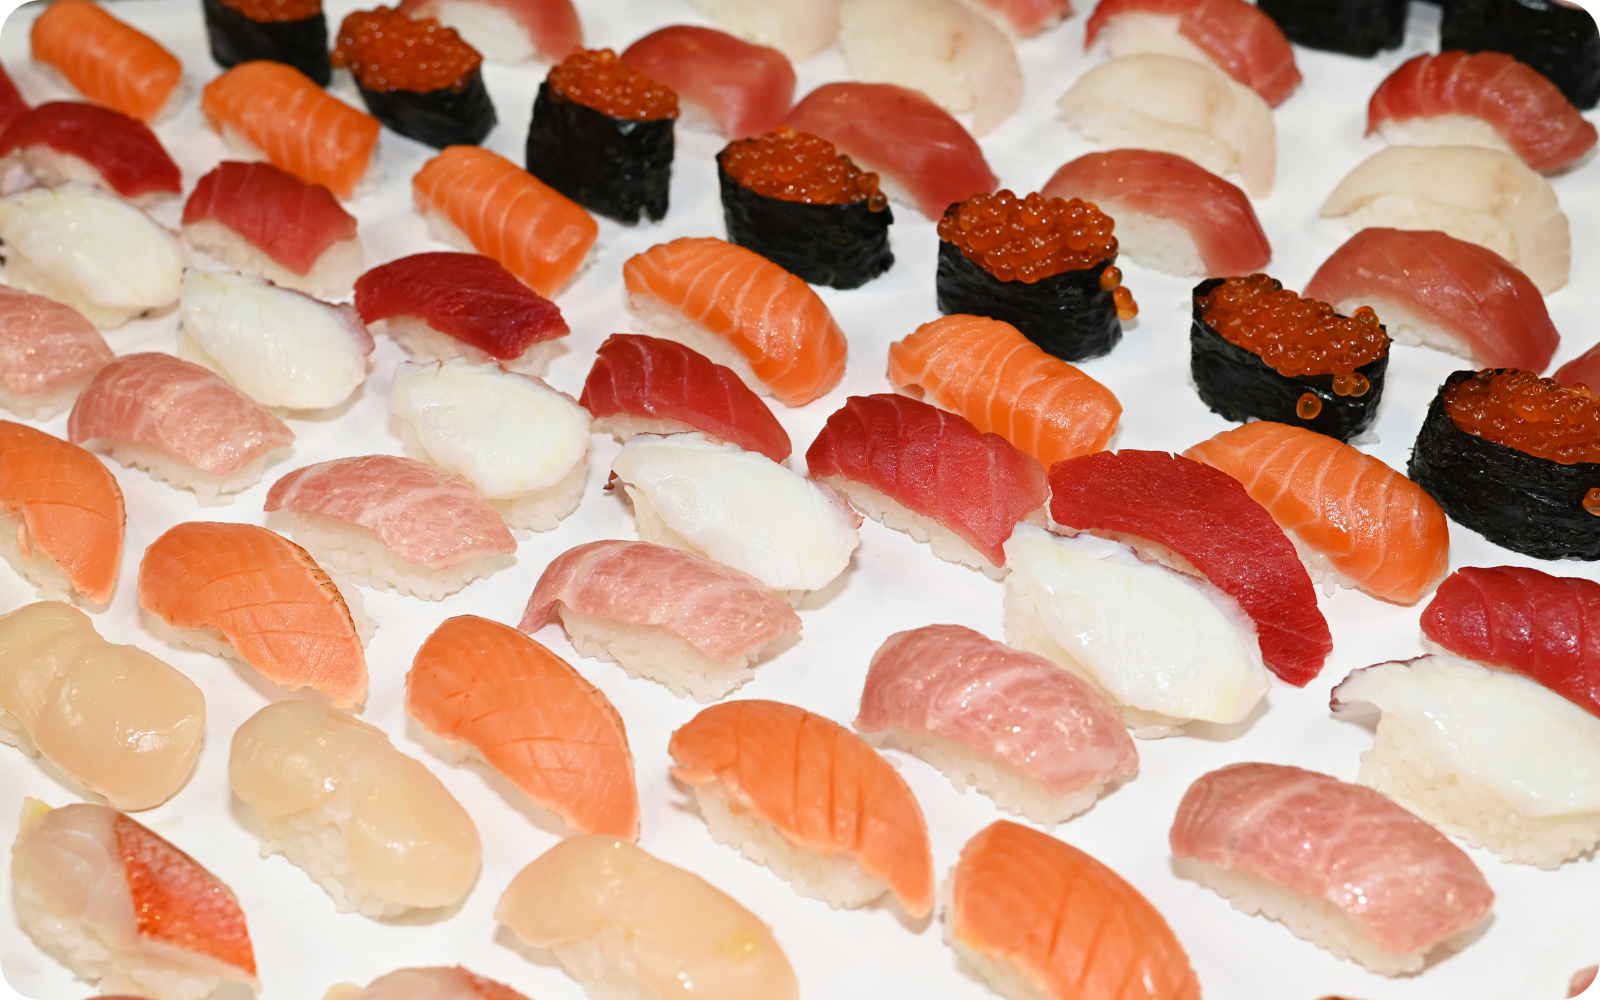 Do It Yourself: How to Make Sushi at Home